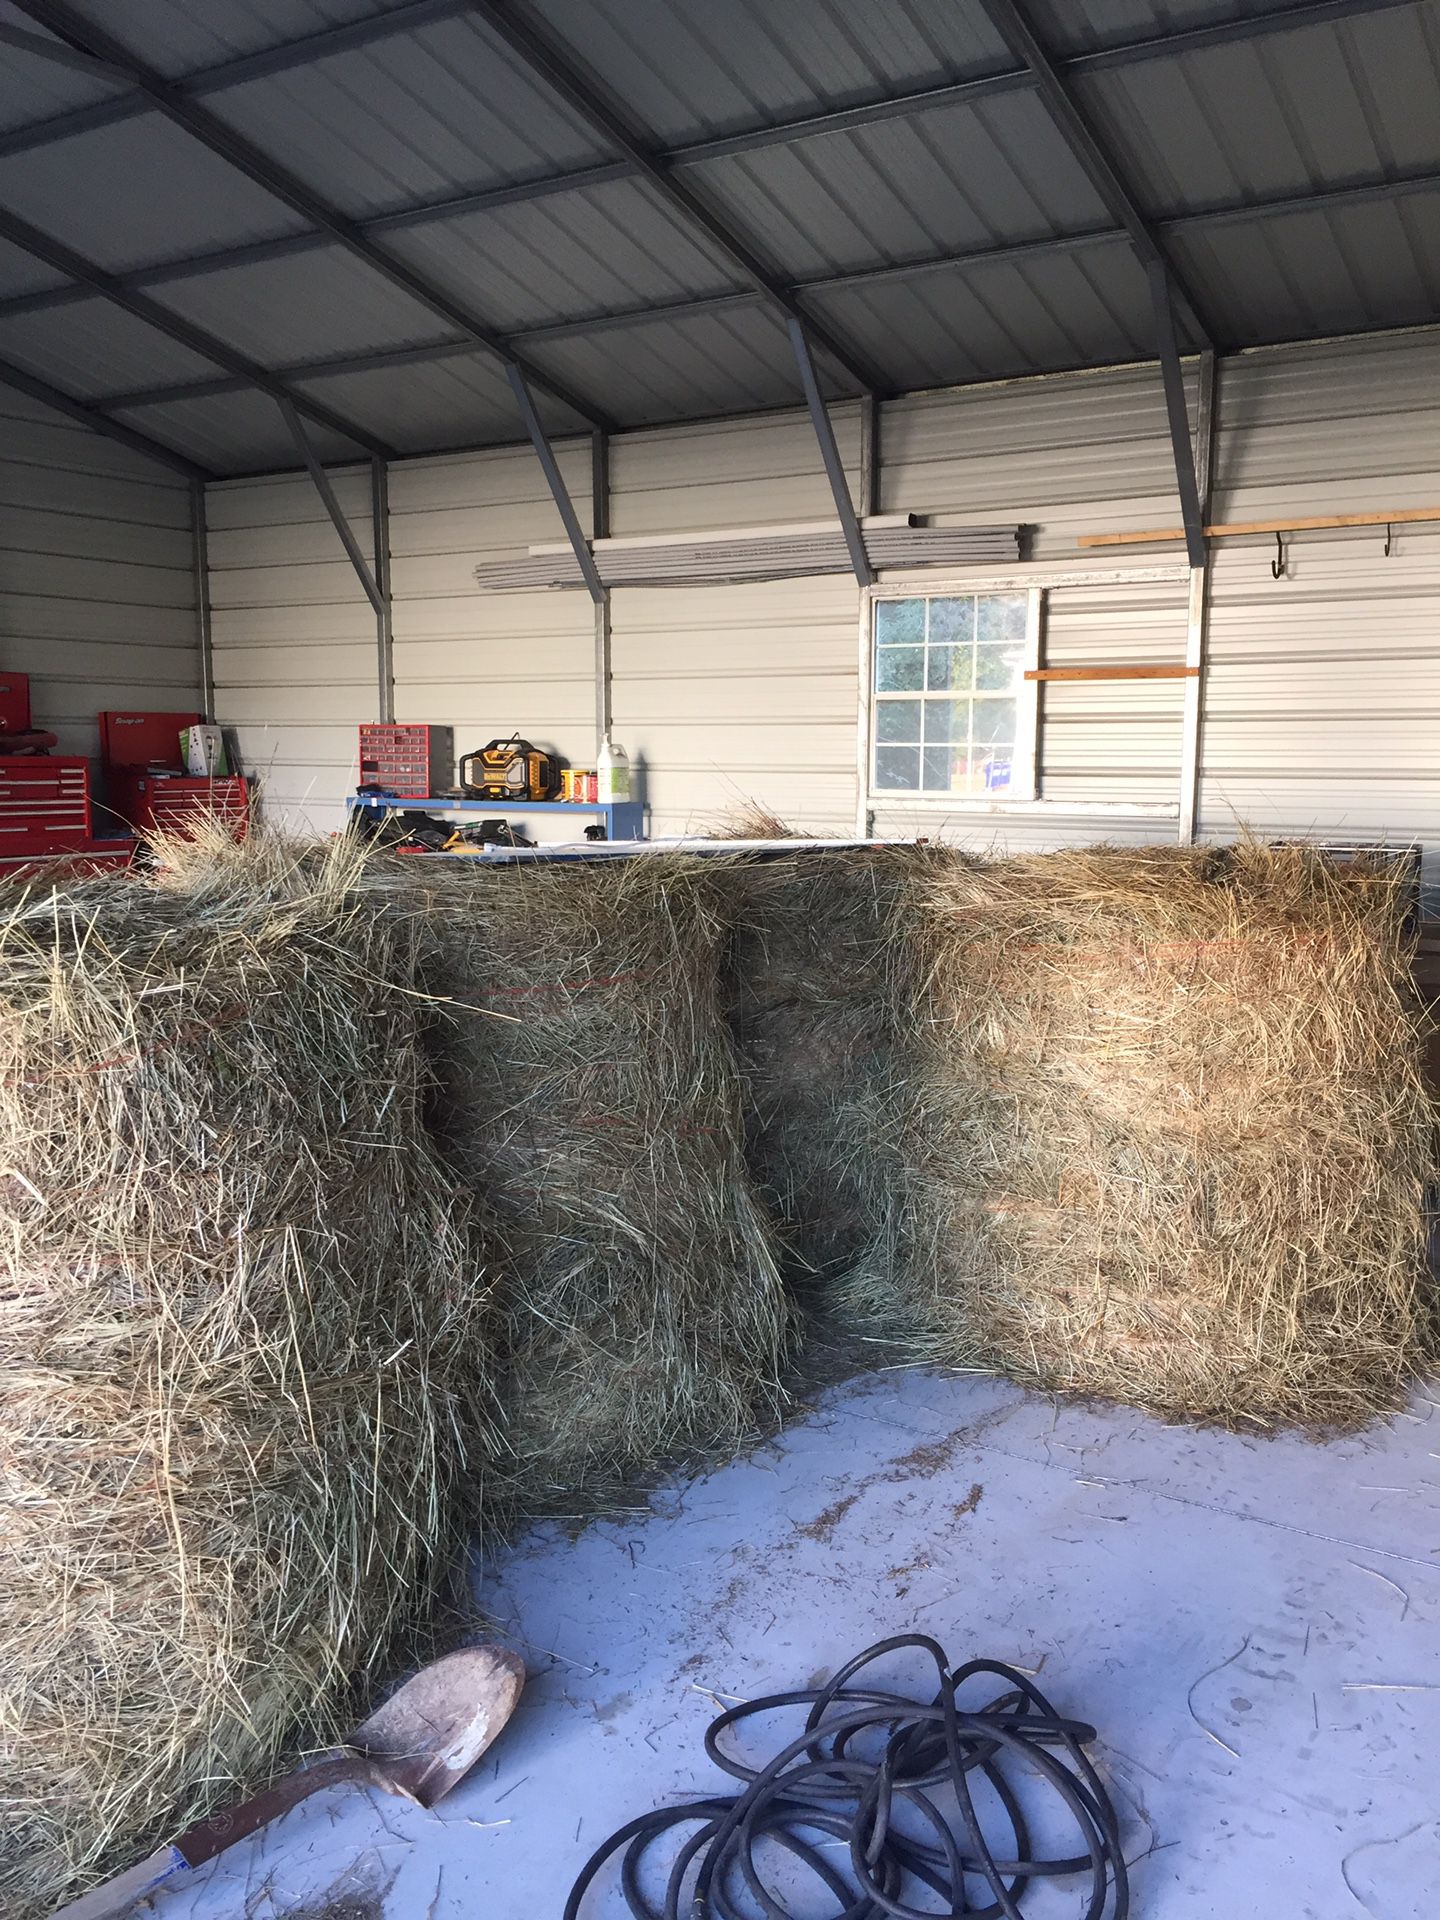 Round bales of cow hay